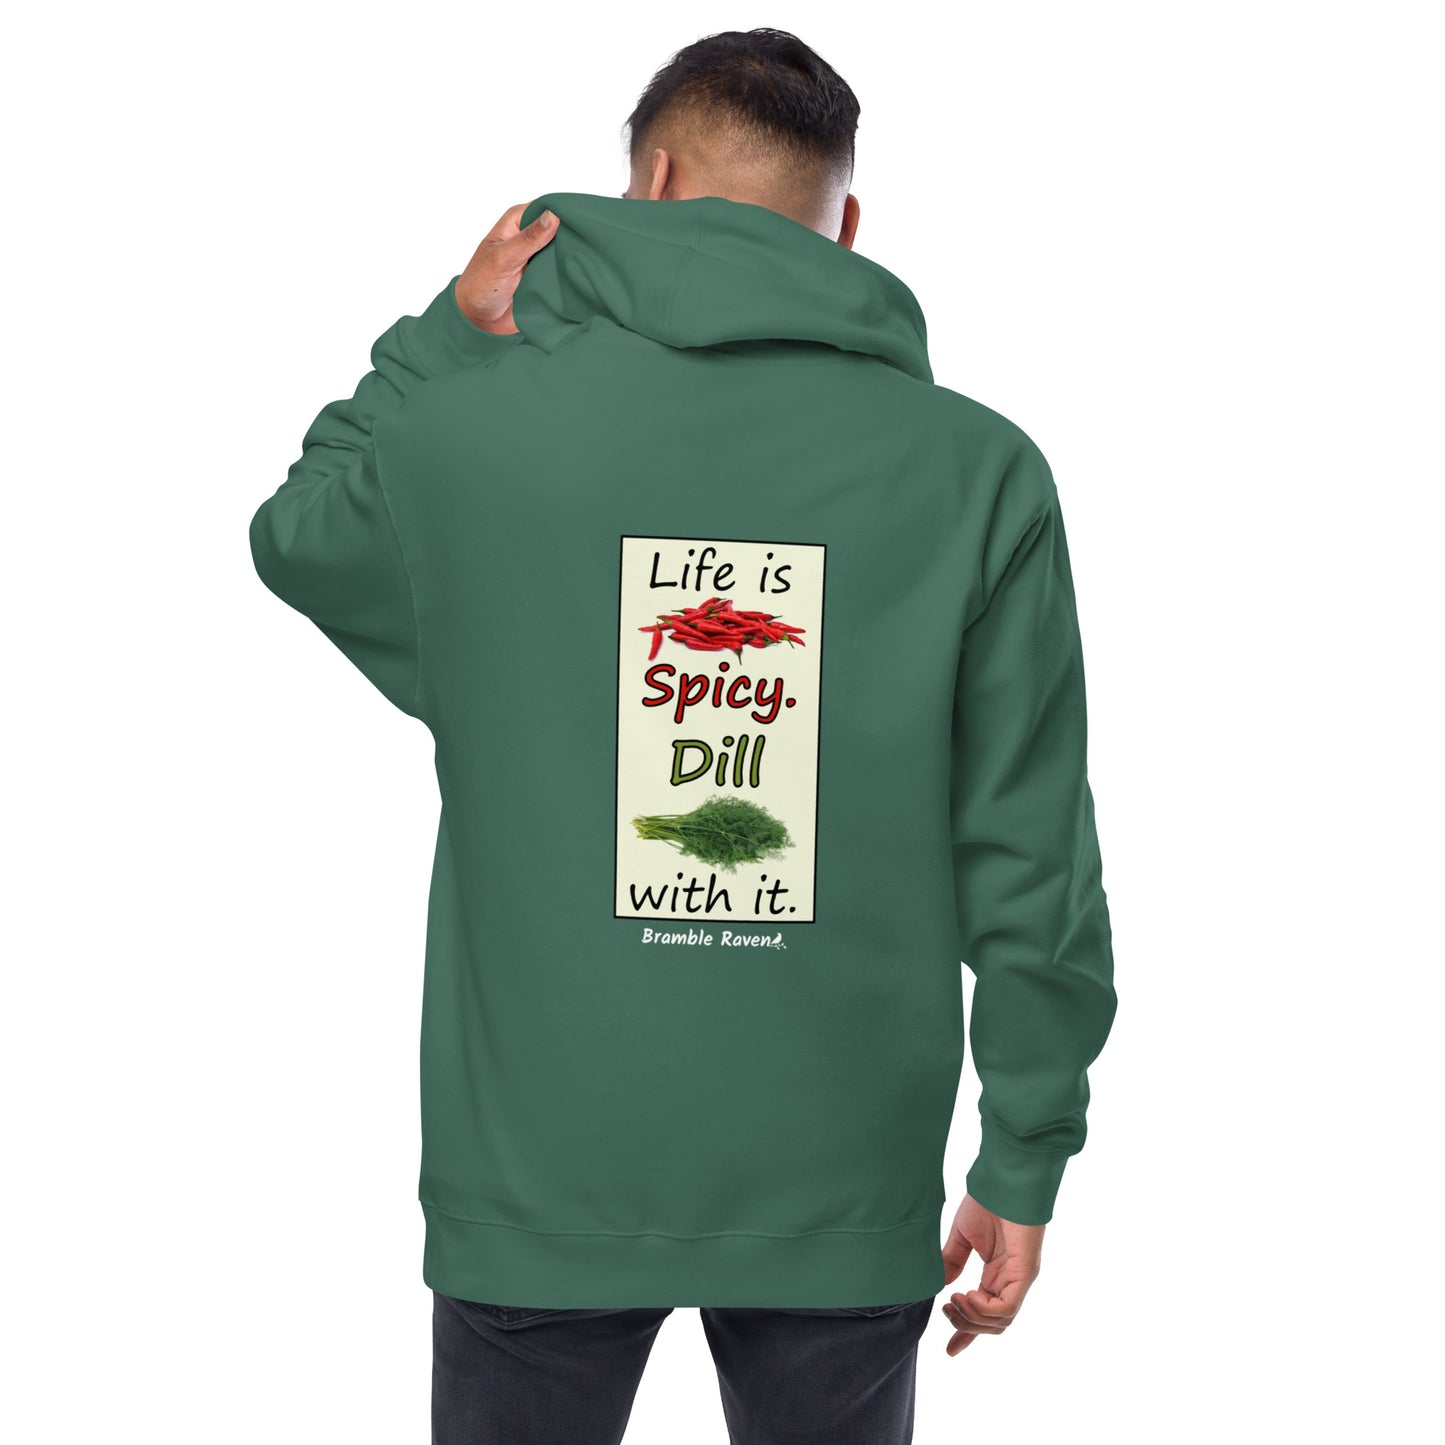 Life is spicy. Dill with it. Text with image of chili peppers and dill weed. Graphic printed on the back of unisex alpine green zip up hoodie. Shown on male model.